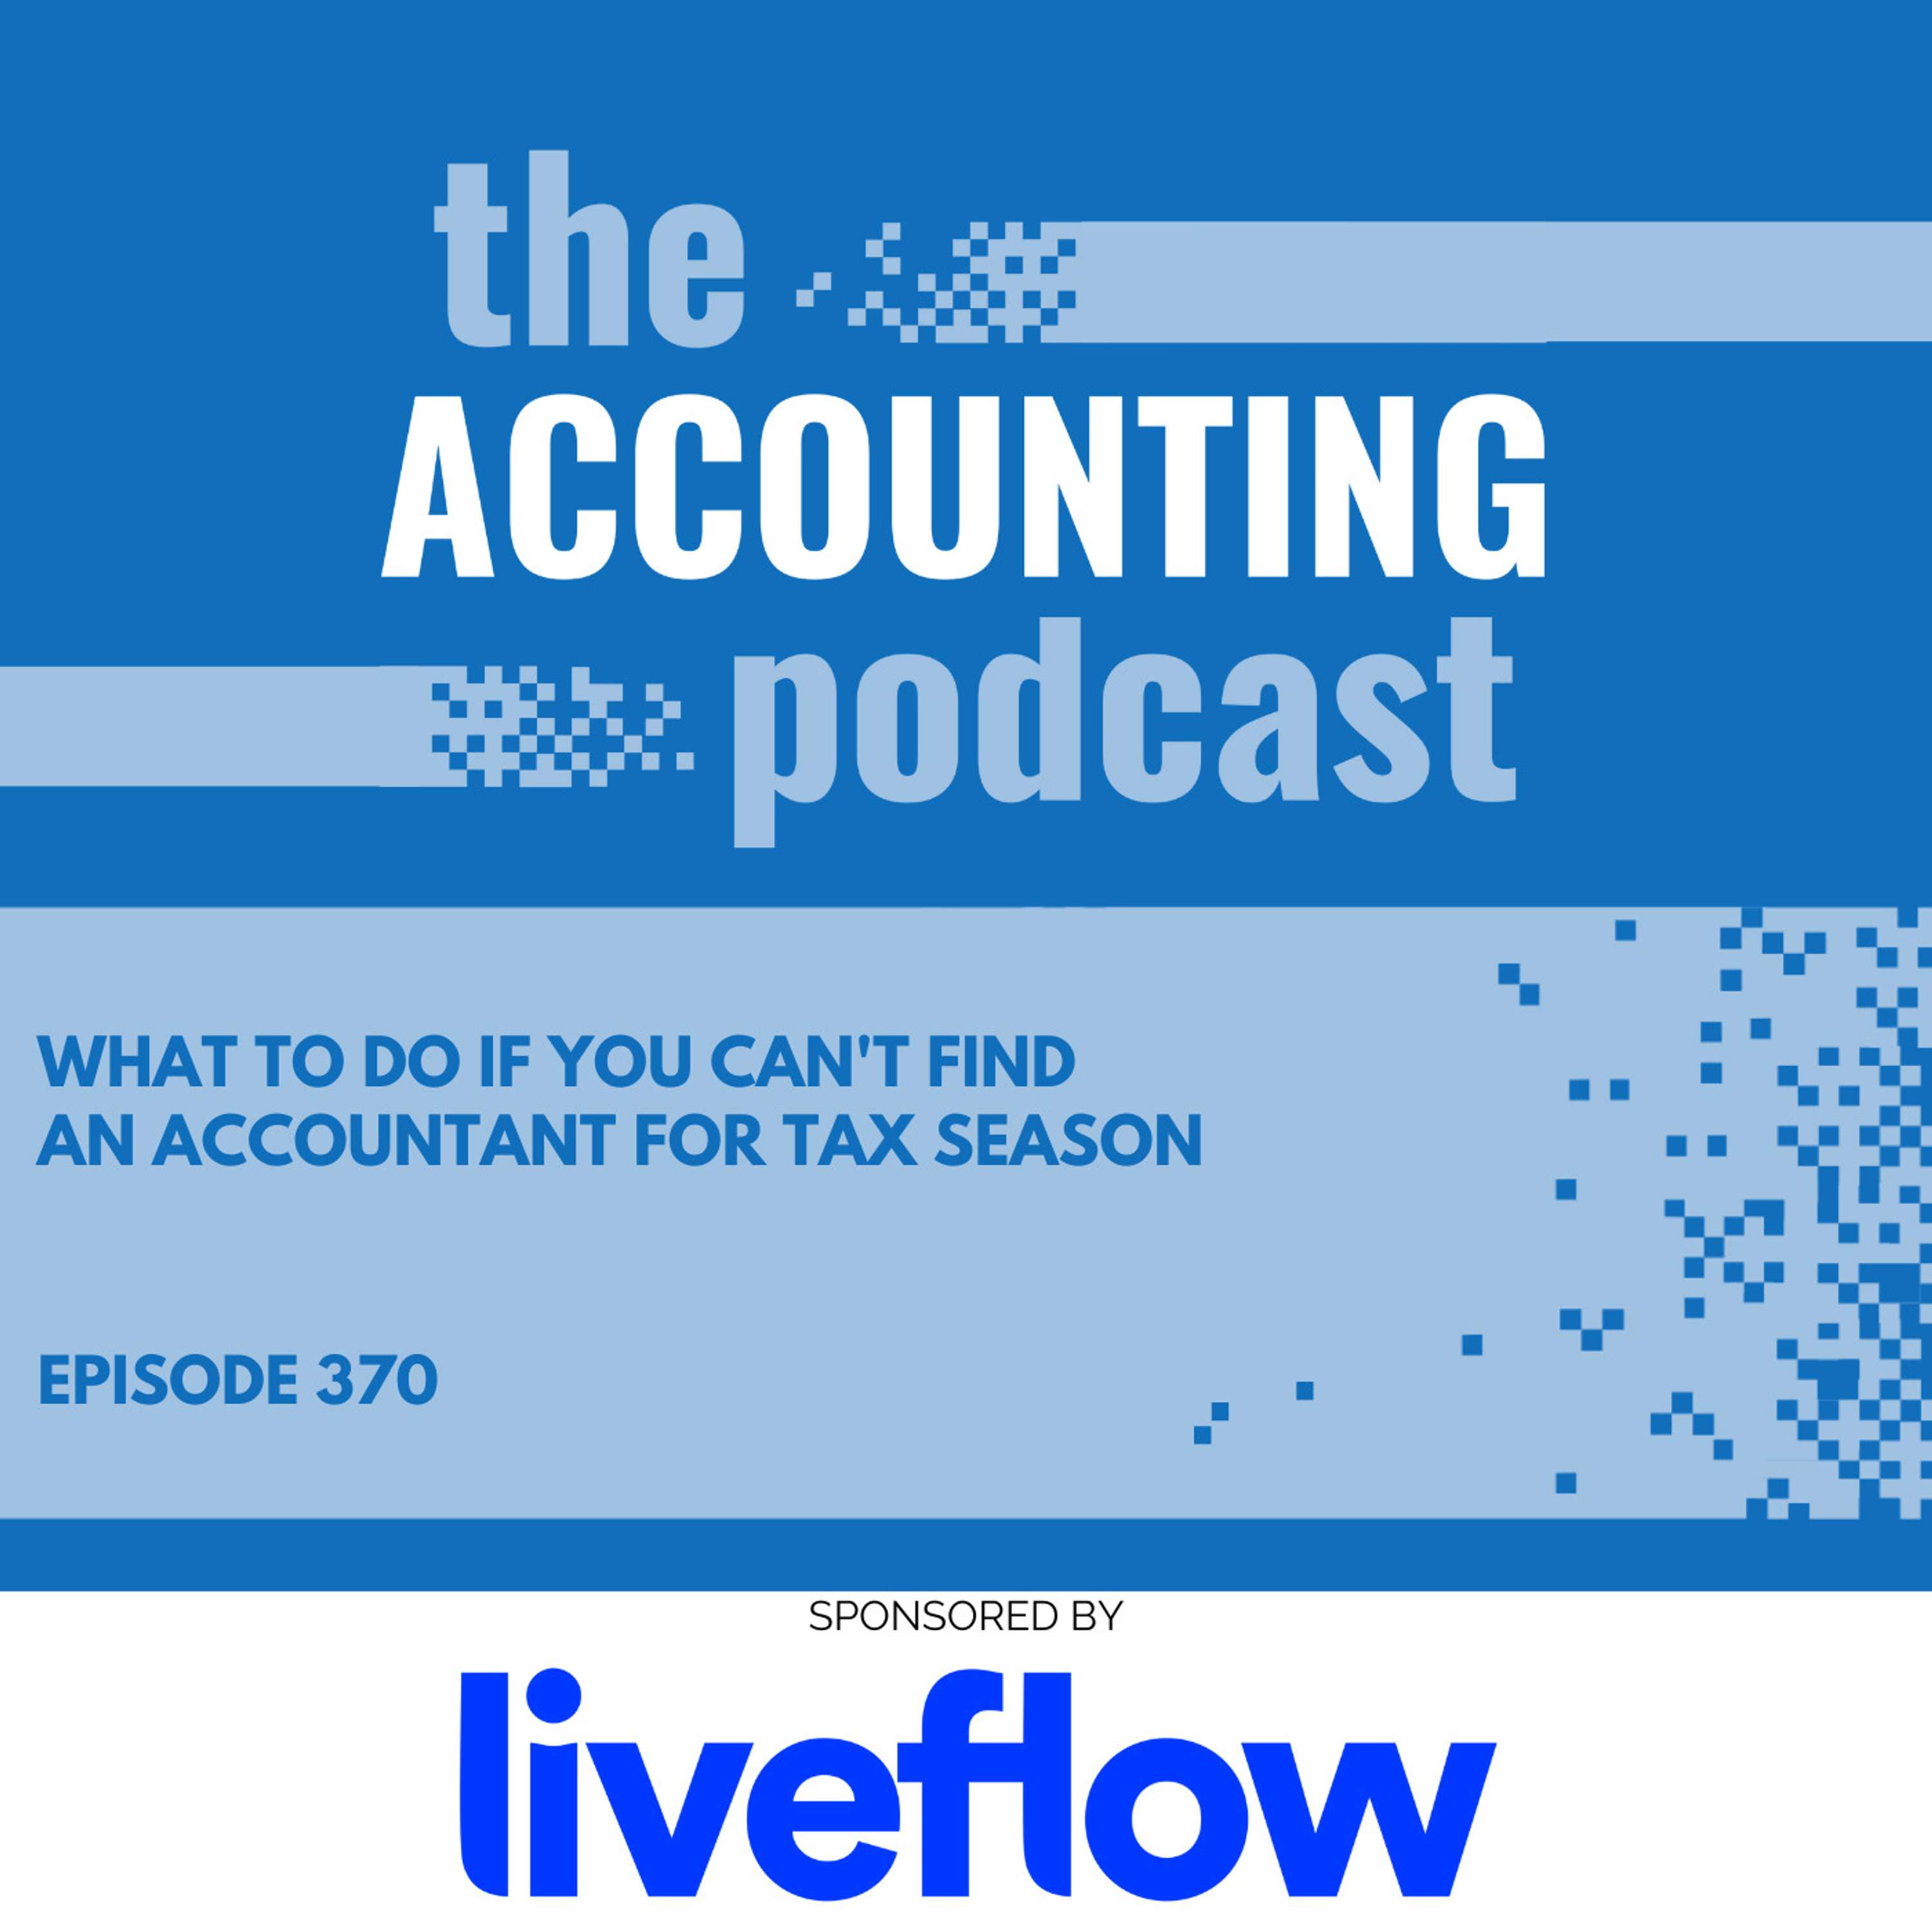 What to Do if You Can't Find an Accountant for Tax Season